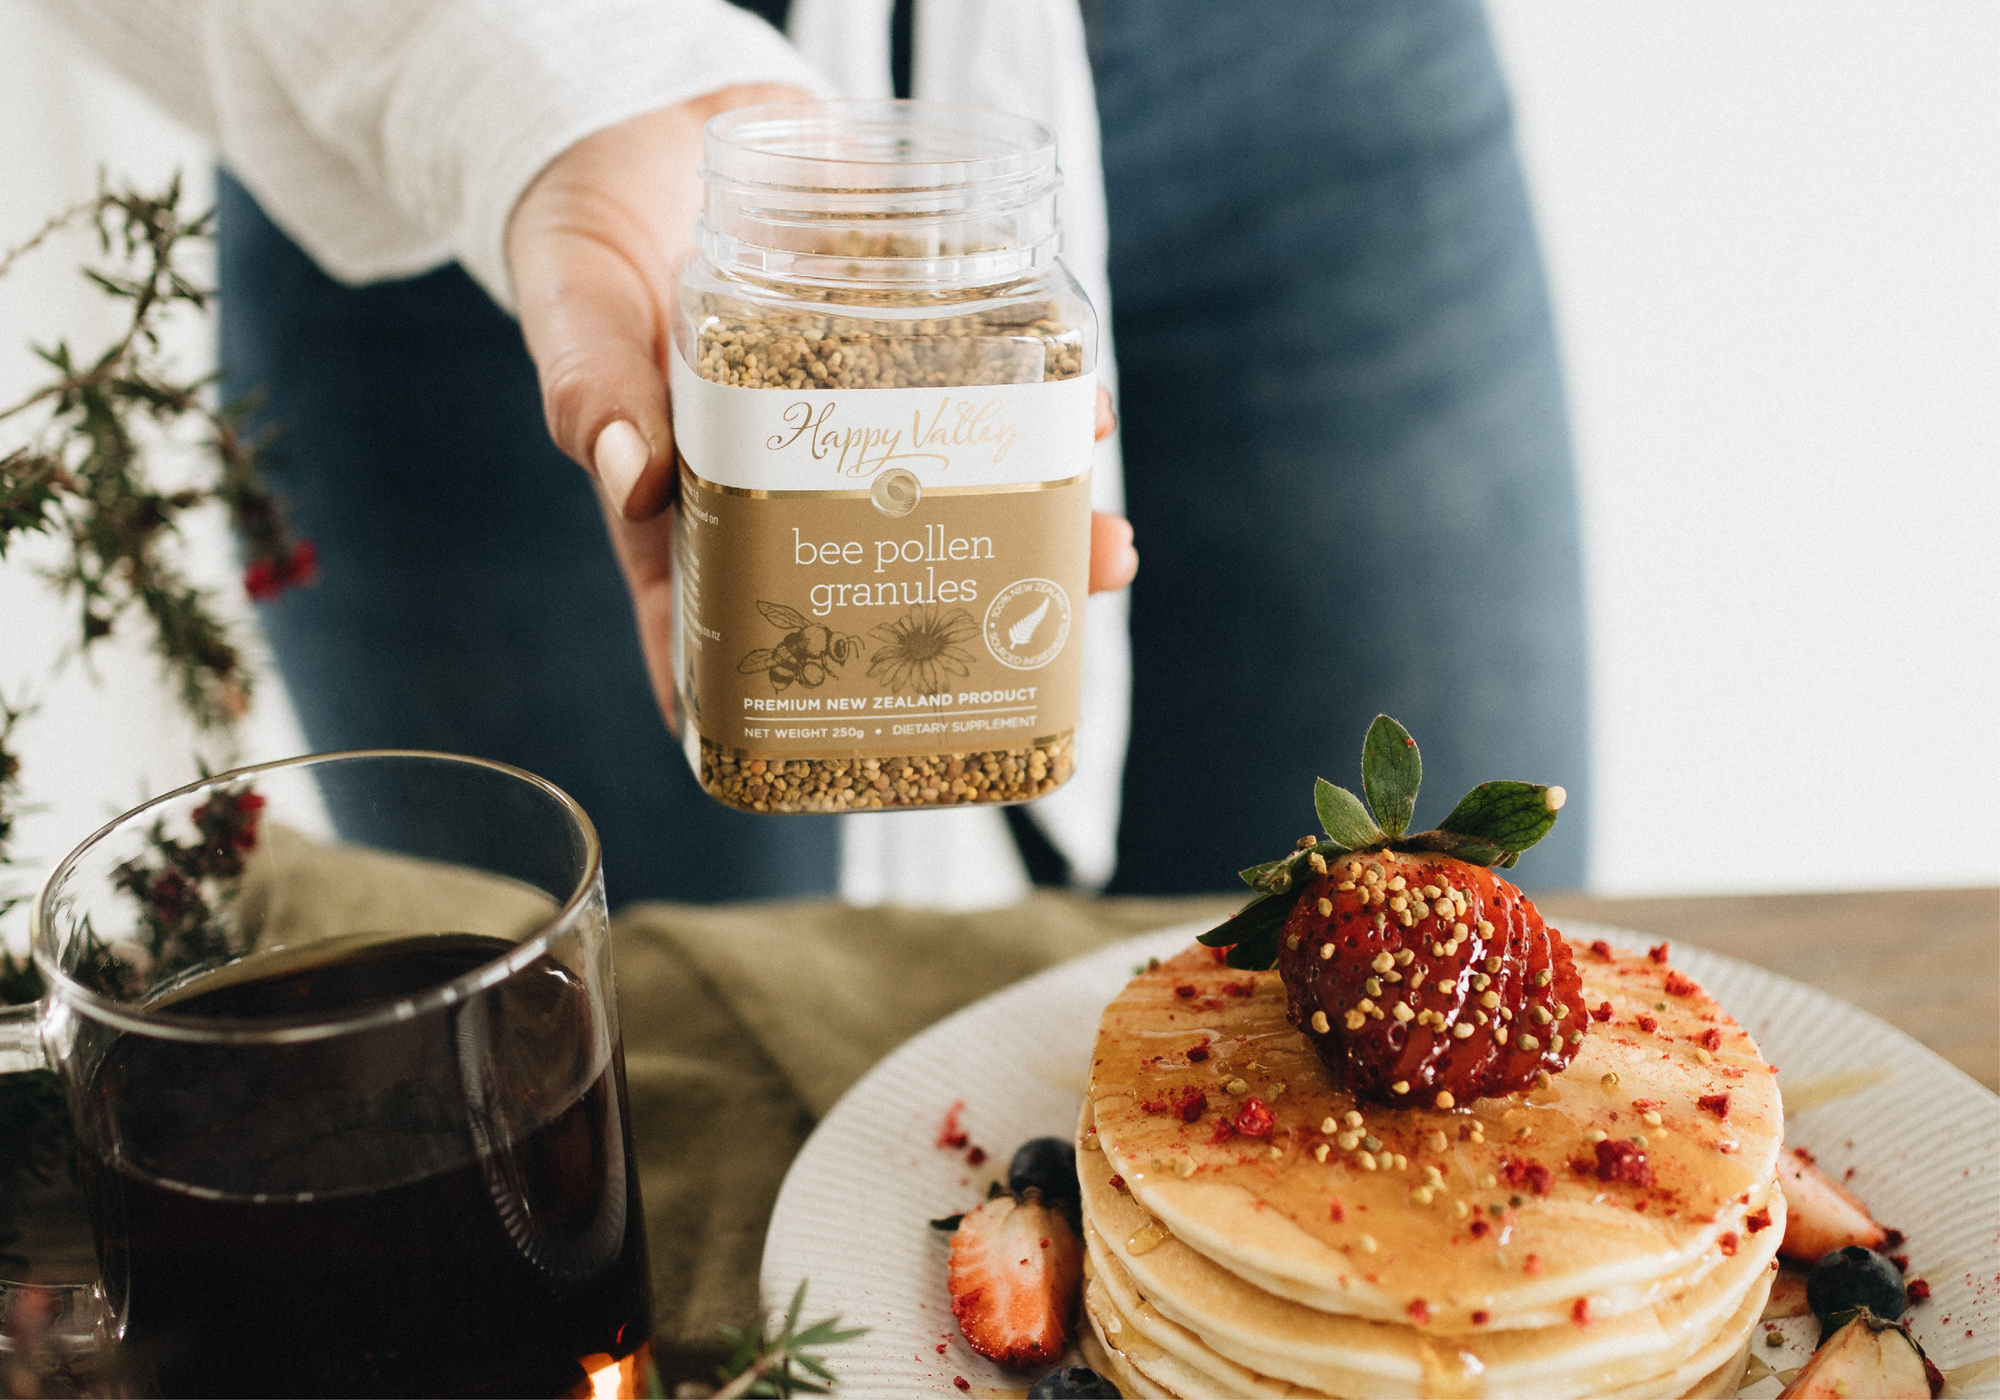 Bee Pollen sprinkled on Pancakes for natural health benefits